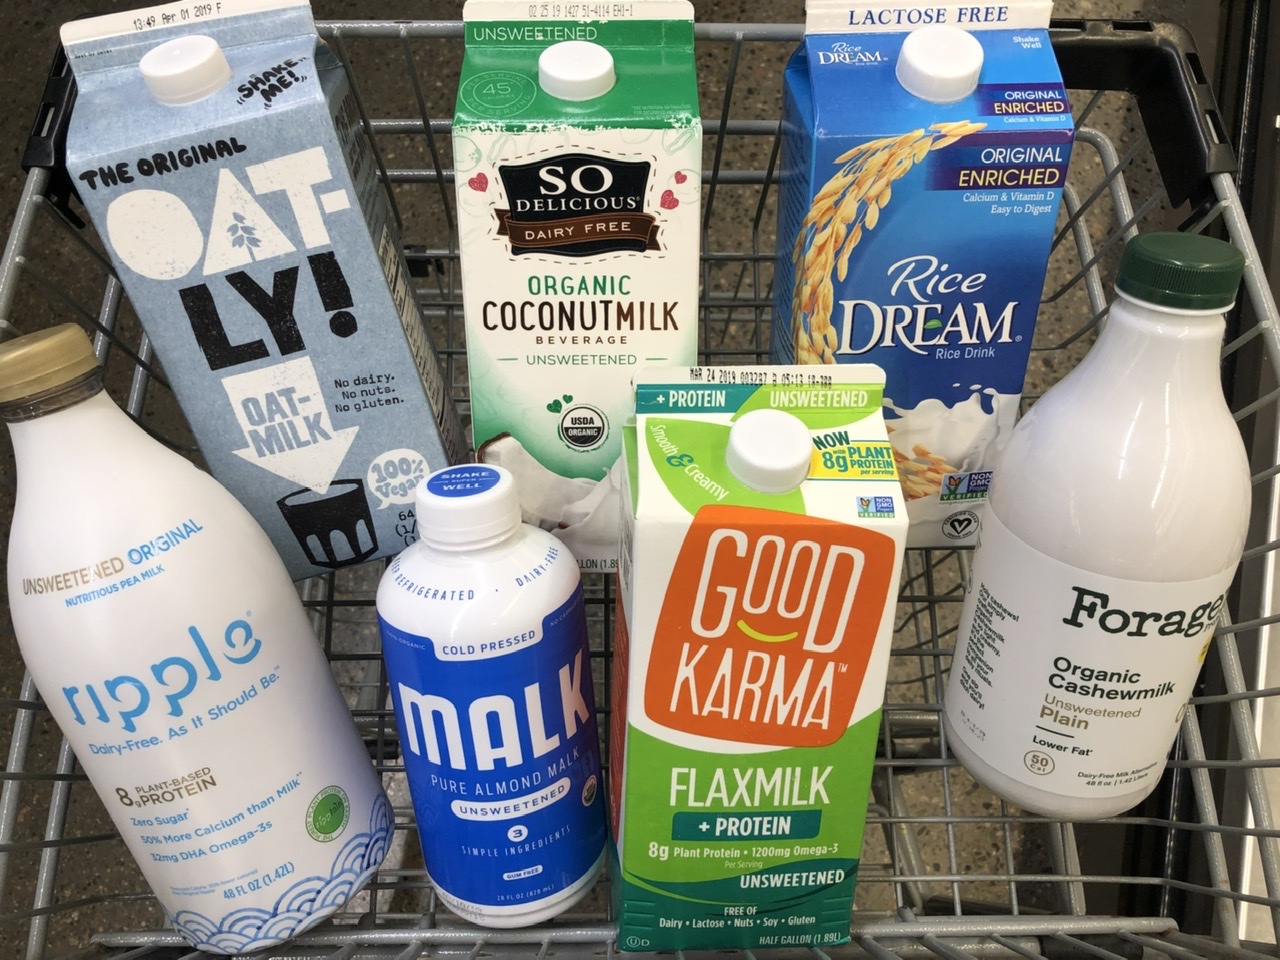 Dairy-alternative milks tend to have fewer calories, less fat (except for coconut-based milk), more water content (for better hydration), less protein (except soy). Some are fortified with other vitamins and nutrients.